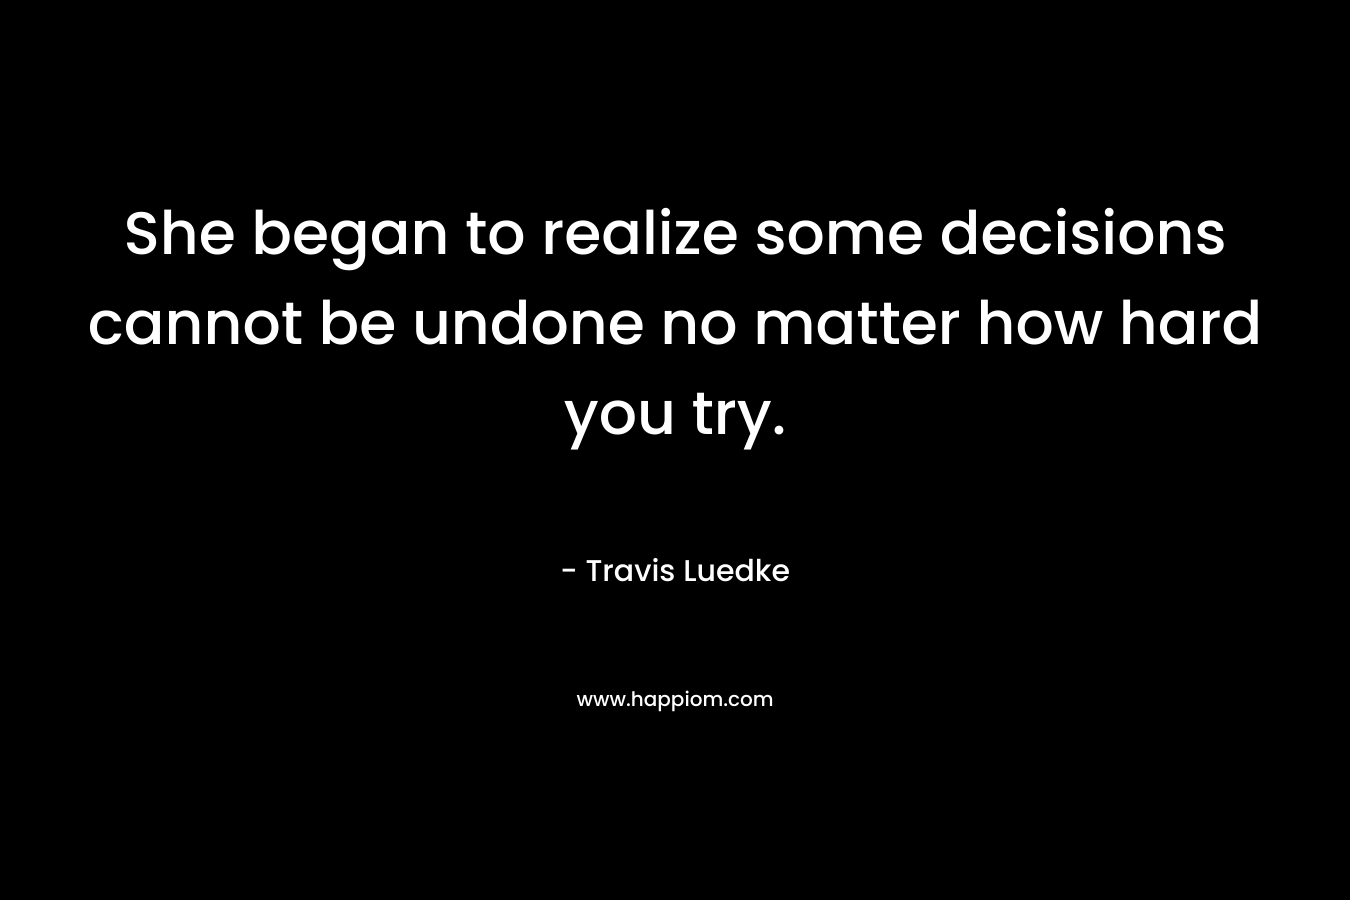 She began to realize some decisions cannot be undone no matter how hard you try. – Travis Luedke